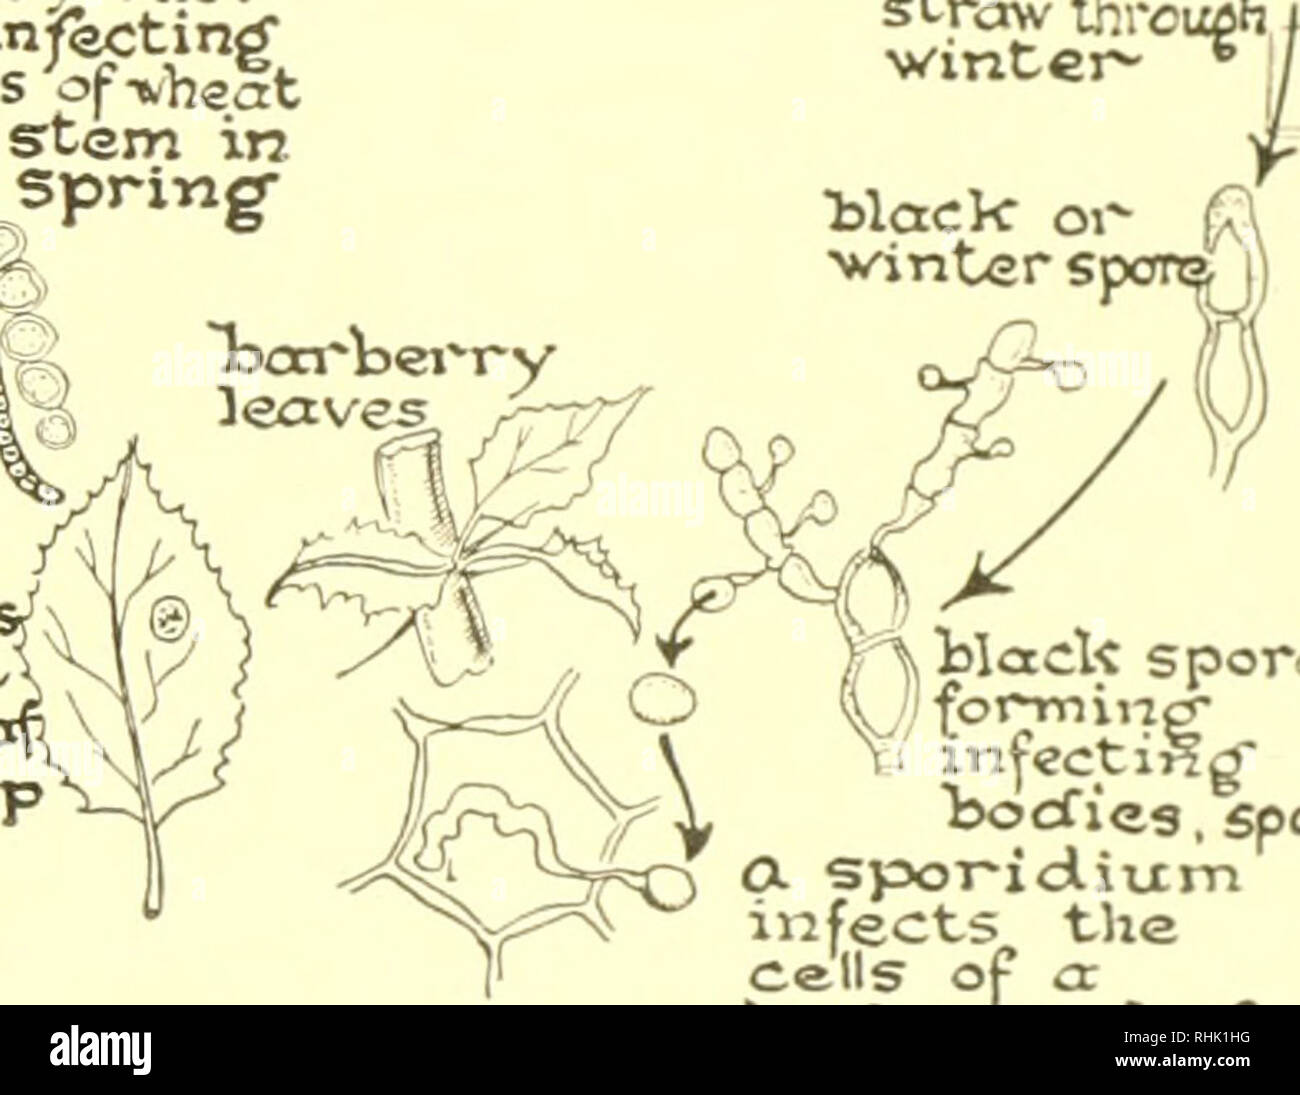 . Biology; the story of living things. mfscts stem through breo-^hing&quot; ?Â«&quot;&quot;Â«. red rust syjrecuil^ , from stem to stem/ cCixriijg' Sixmme'P blaclc or ^vinter rust lives on straw thrcuflh, winter- * &quot; infection form', barberry rust onborberrjlea.^ a cluster cup' The life history of black stem grain rust. controlled.. r, â !, black spora inject ing^ bocfics, sporicCa a spoTid.ium infects the Cells of a barberry leaf Explain how this rust may he both the barberry plant and the wheat to complete its life history; the pine tree blister, which lives on the currant or gooseberry Stock Photo